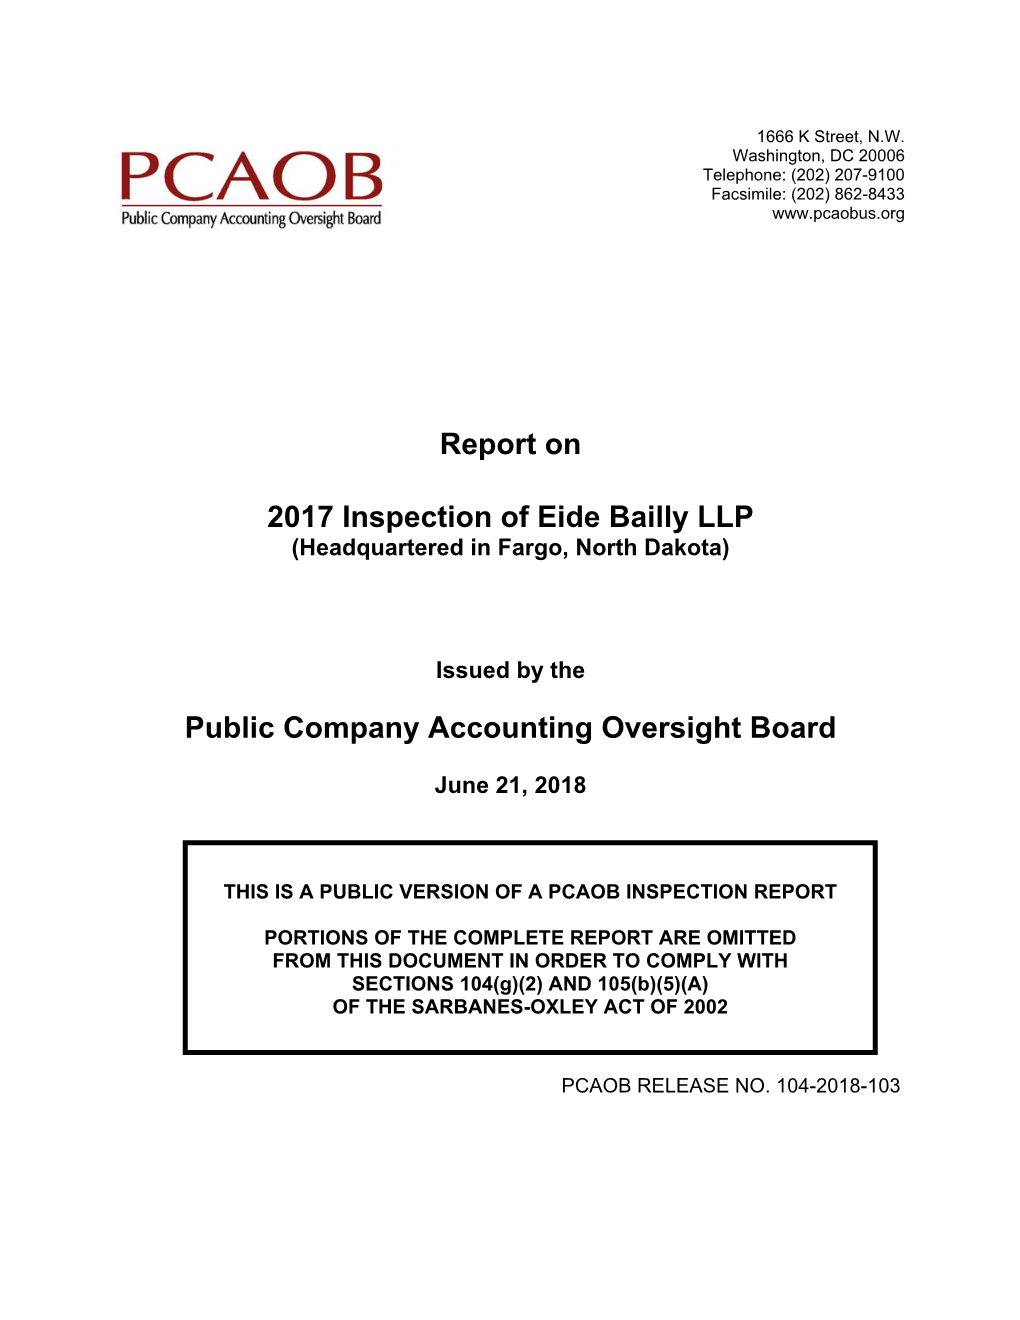 Report on 2017 Inspection of Eide Bailly LLP Public Company